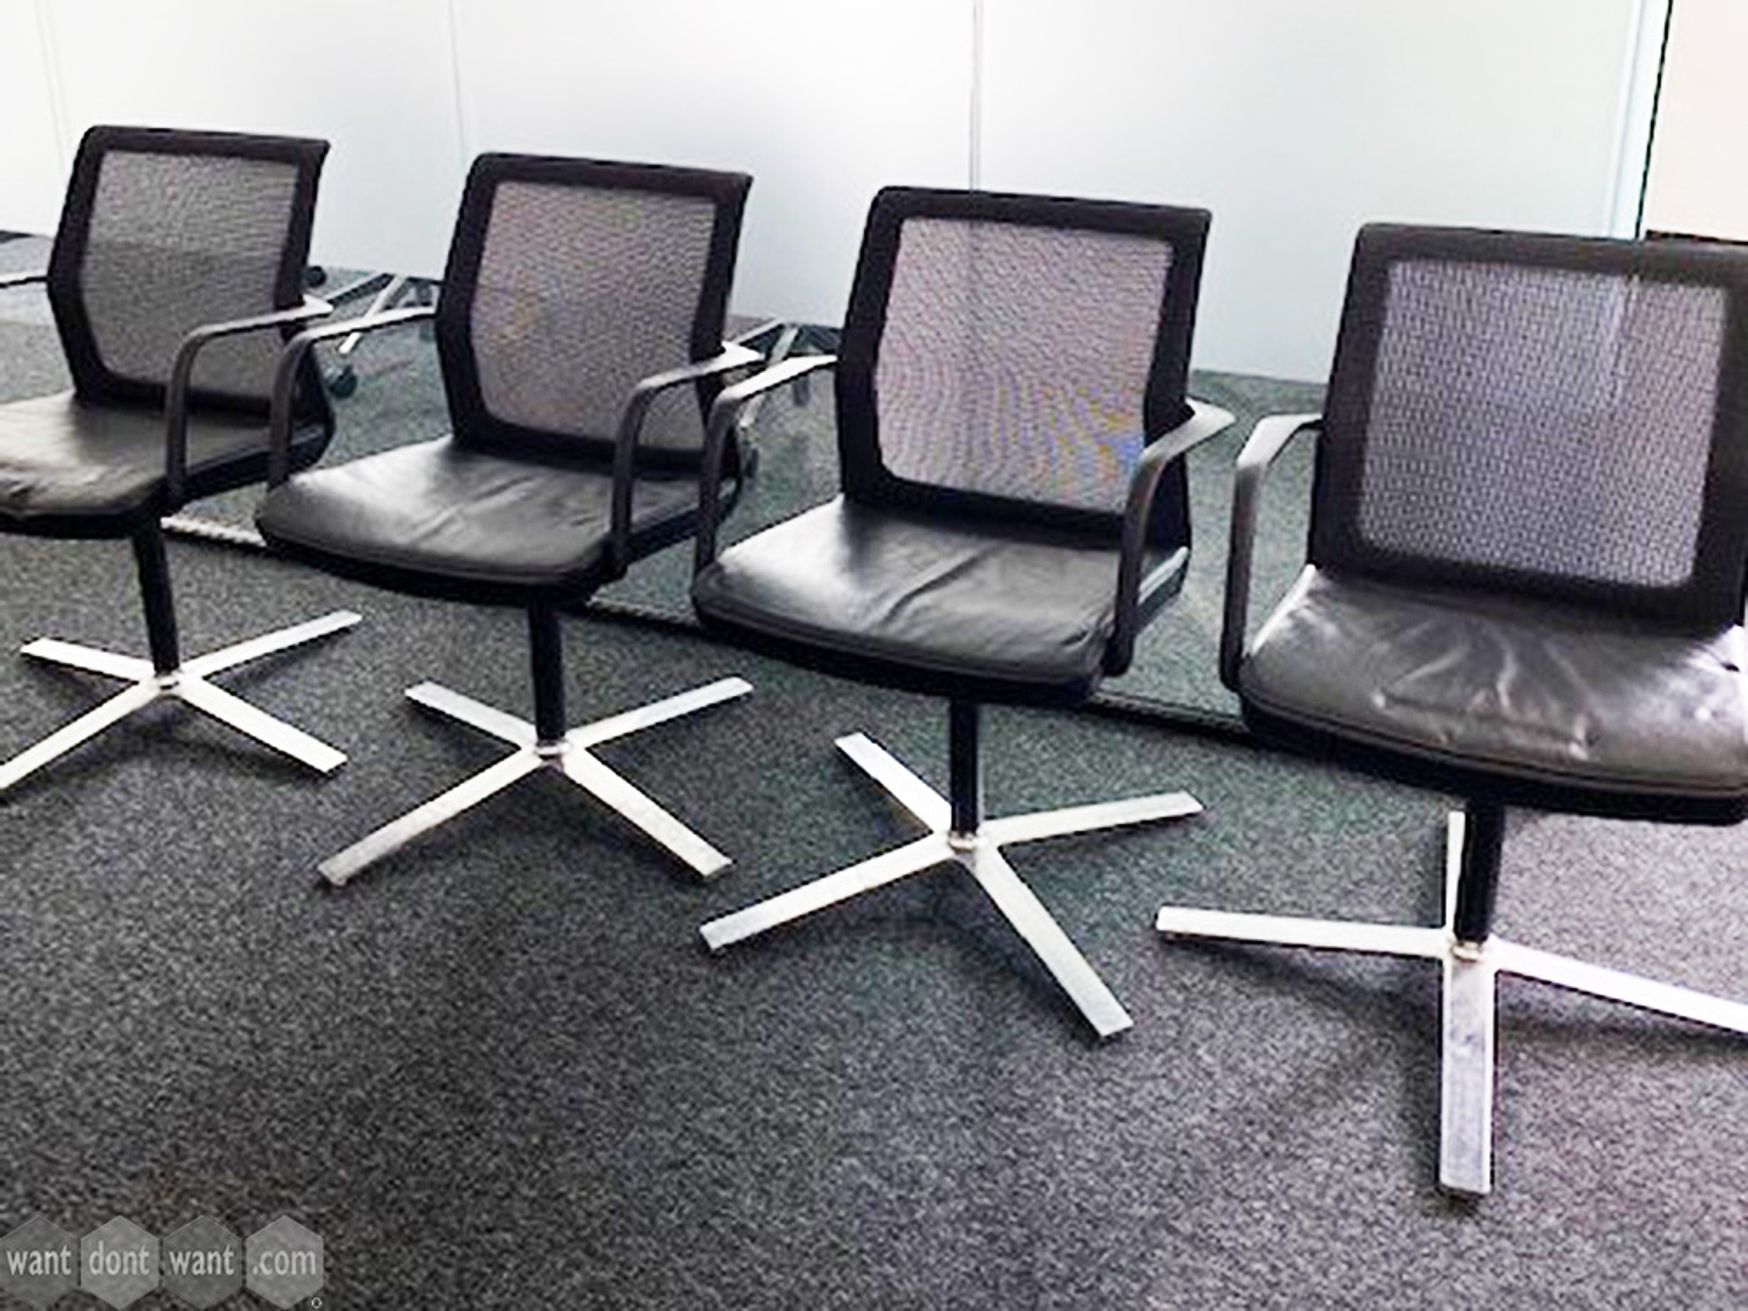 Used Orangebox 'Workday' meeting chairs with black leather seats